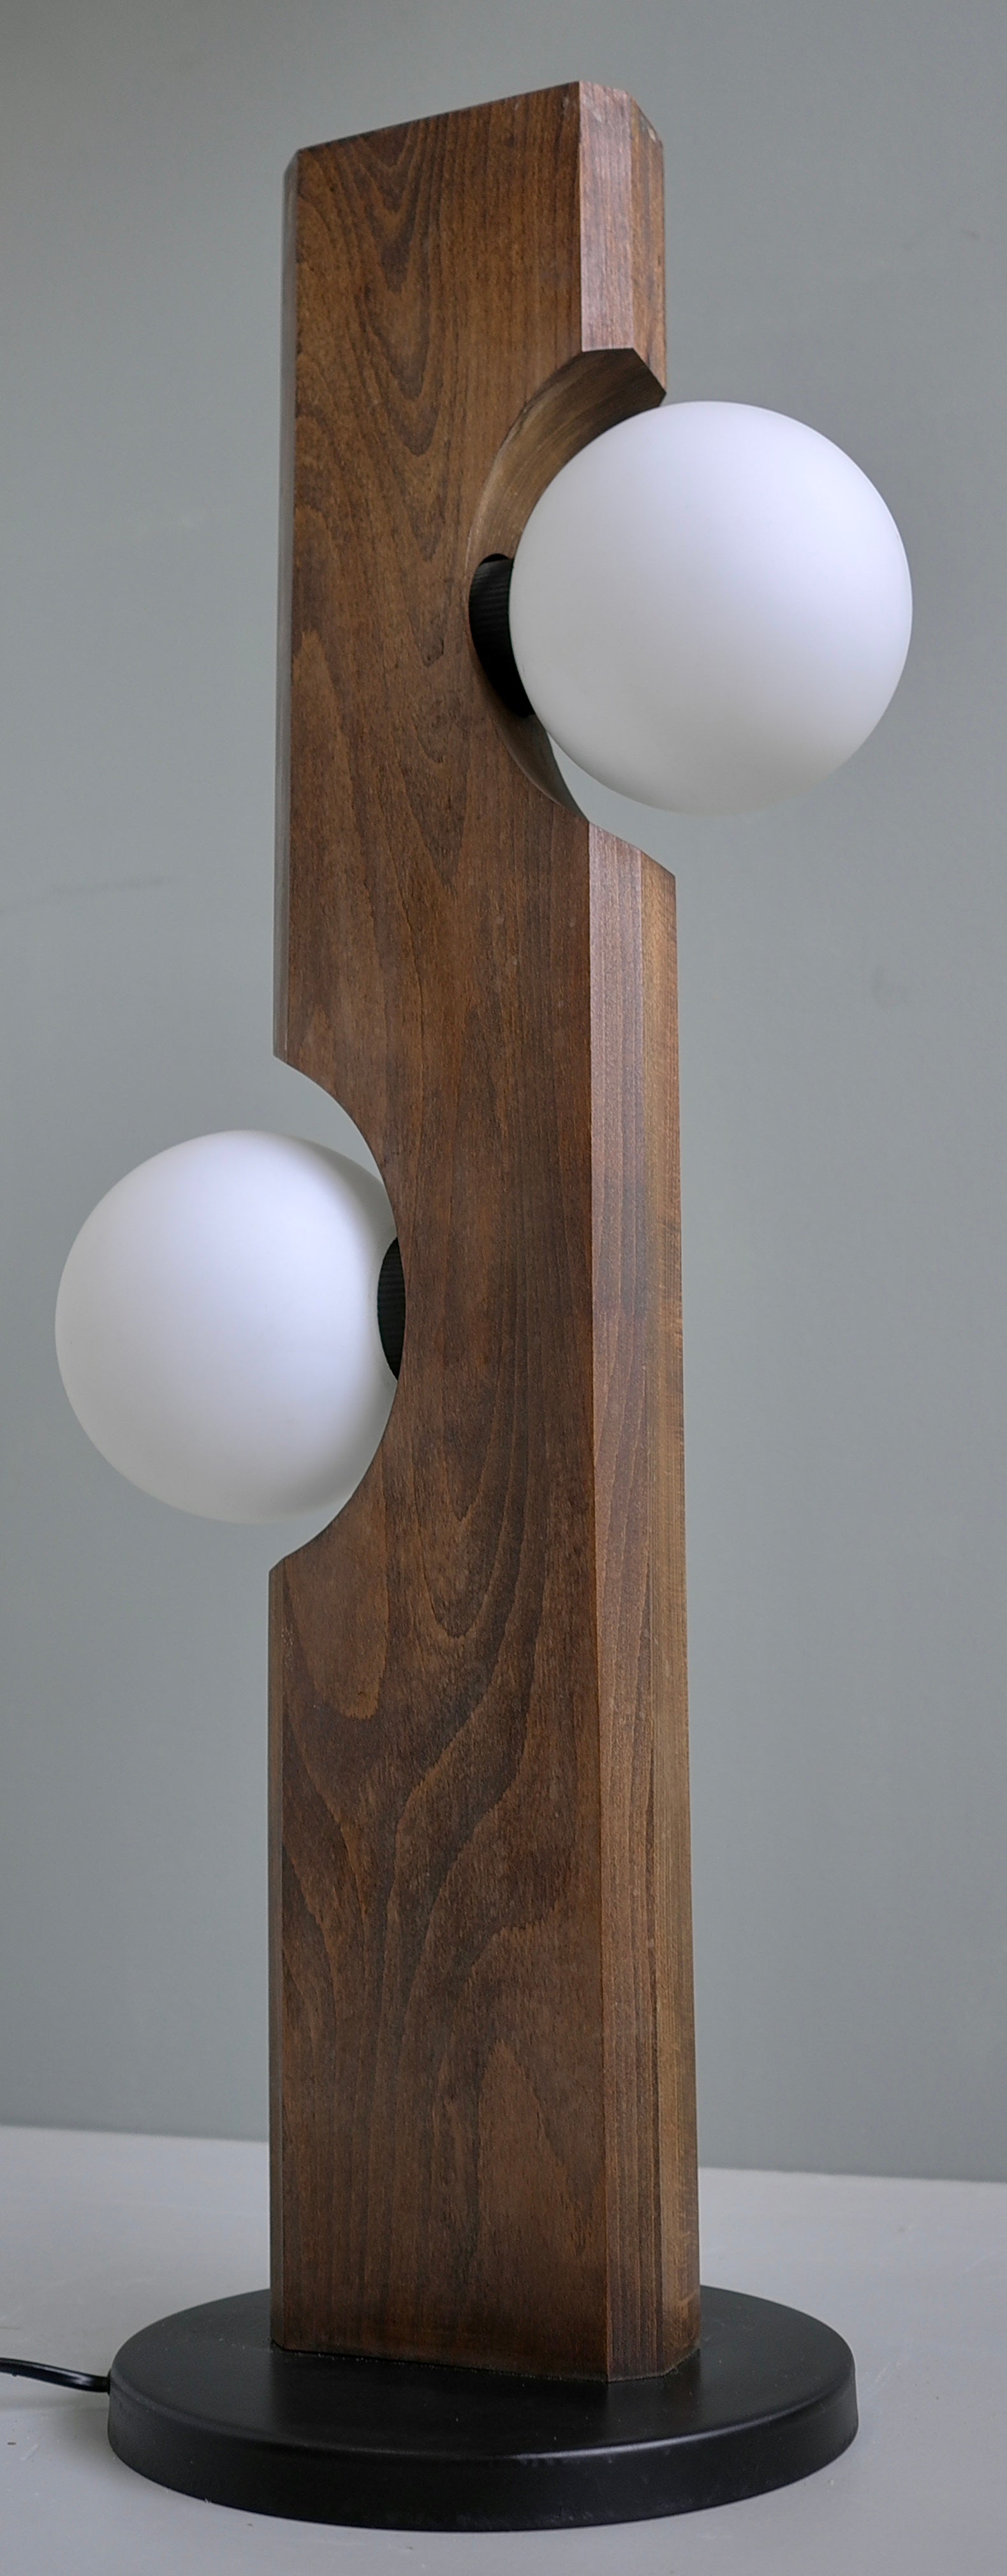 Temde Leuchten Floor or Table lamp in Wood with White Glass Balls, Germany 1969